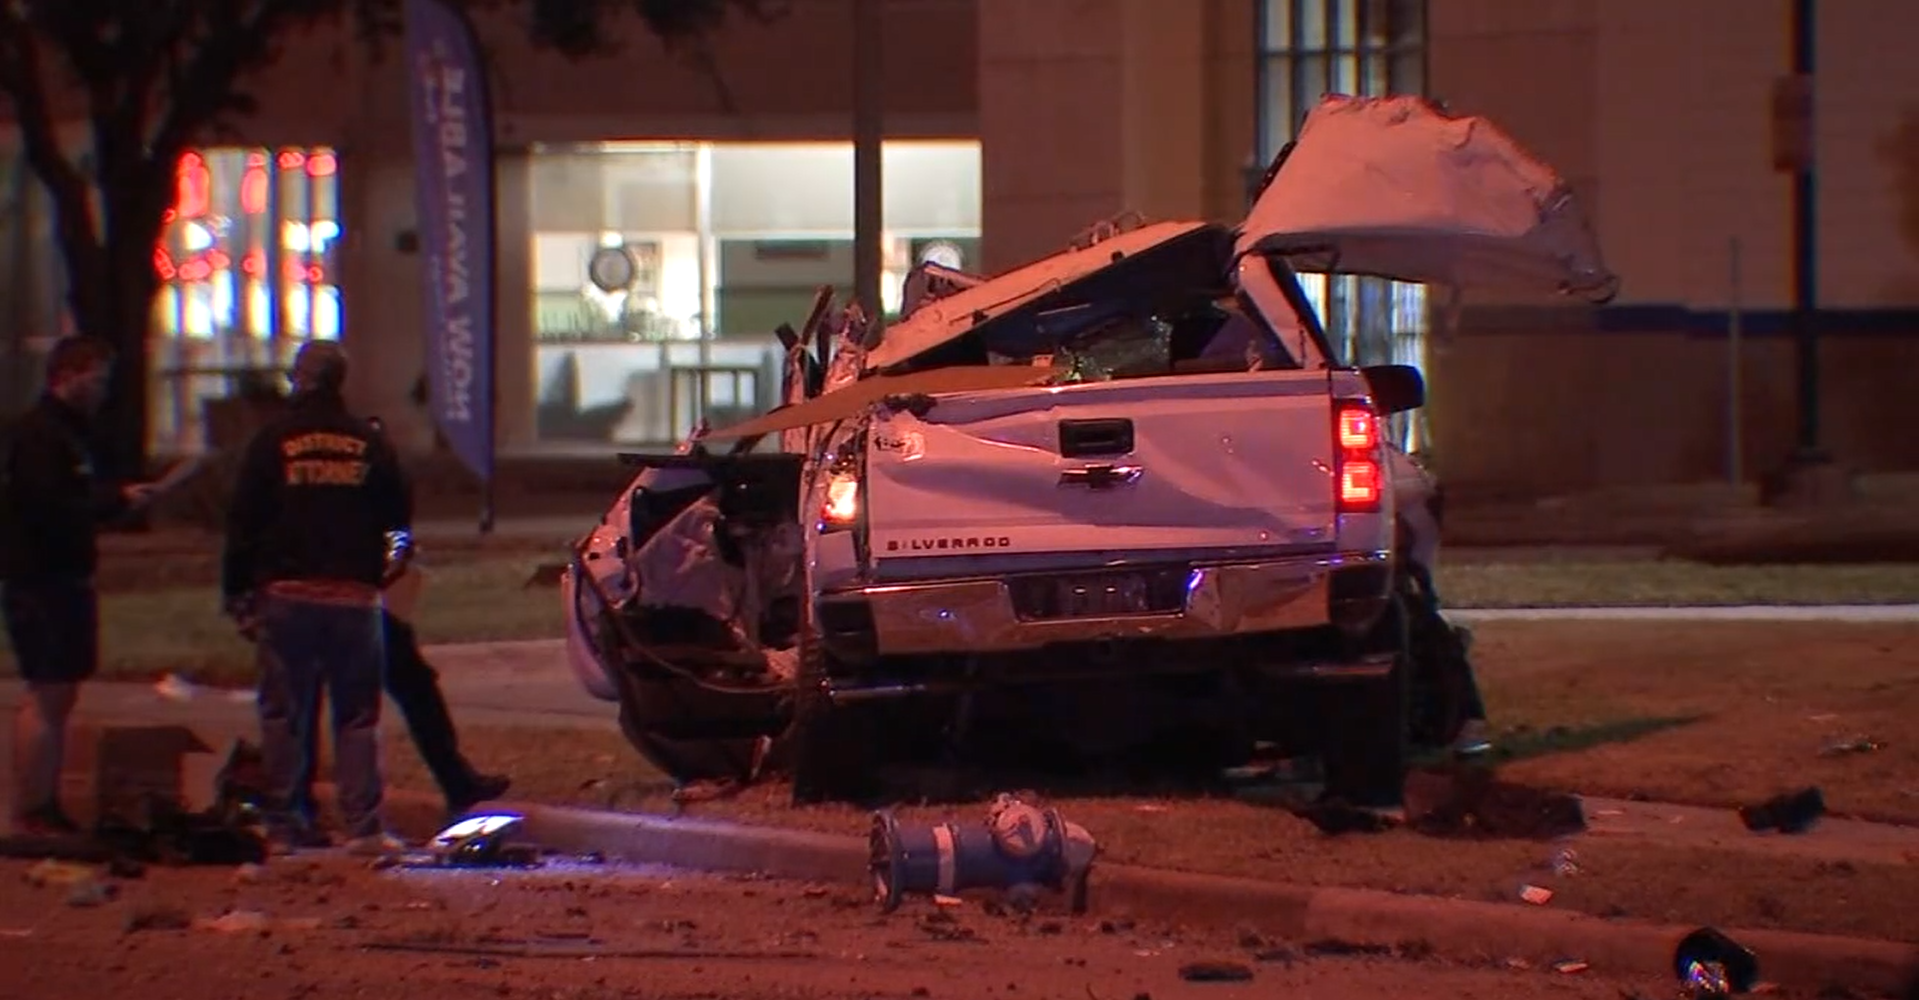 2.14.22_ACCIDENTNEWS_Two Dead after Red Light Runner Causes Crash in Northwest Houston_Photo